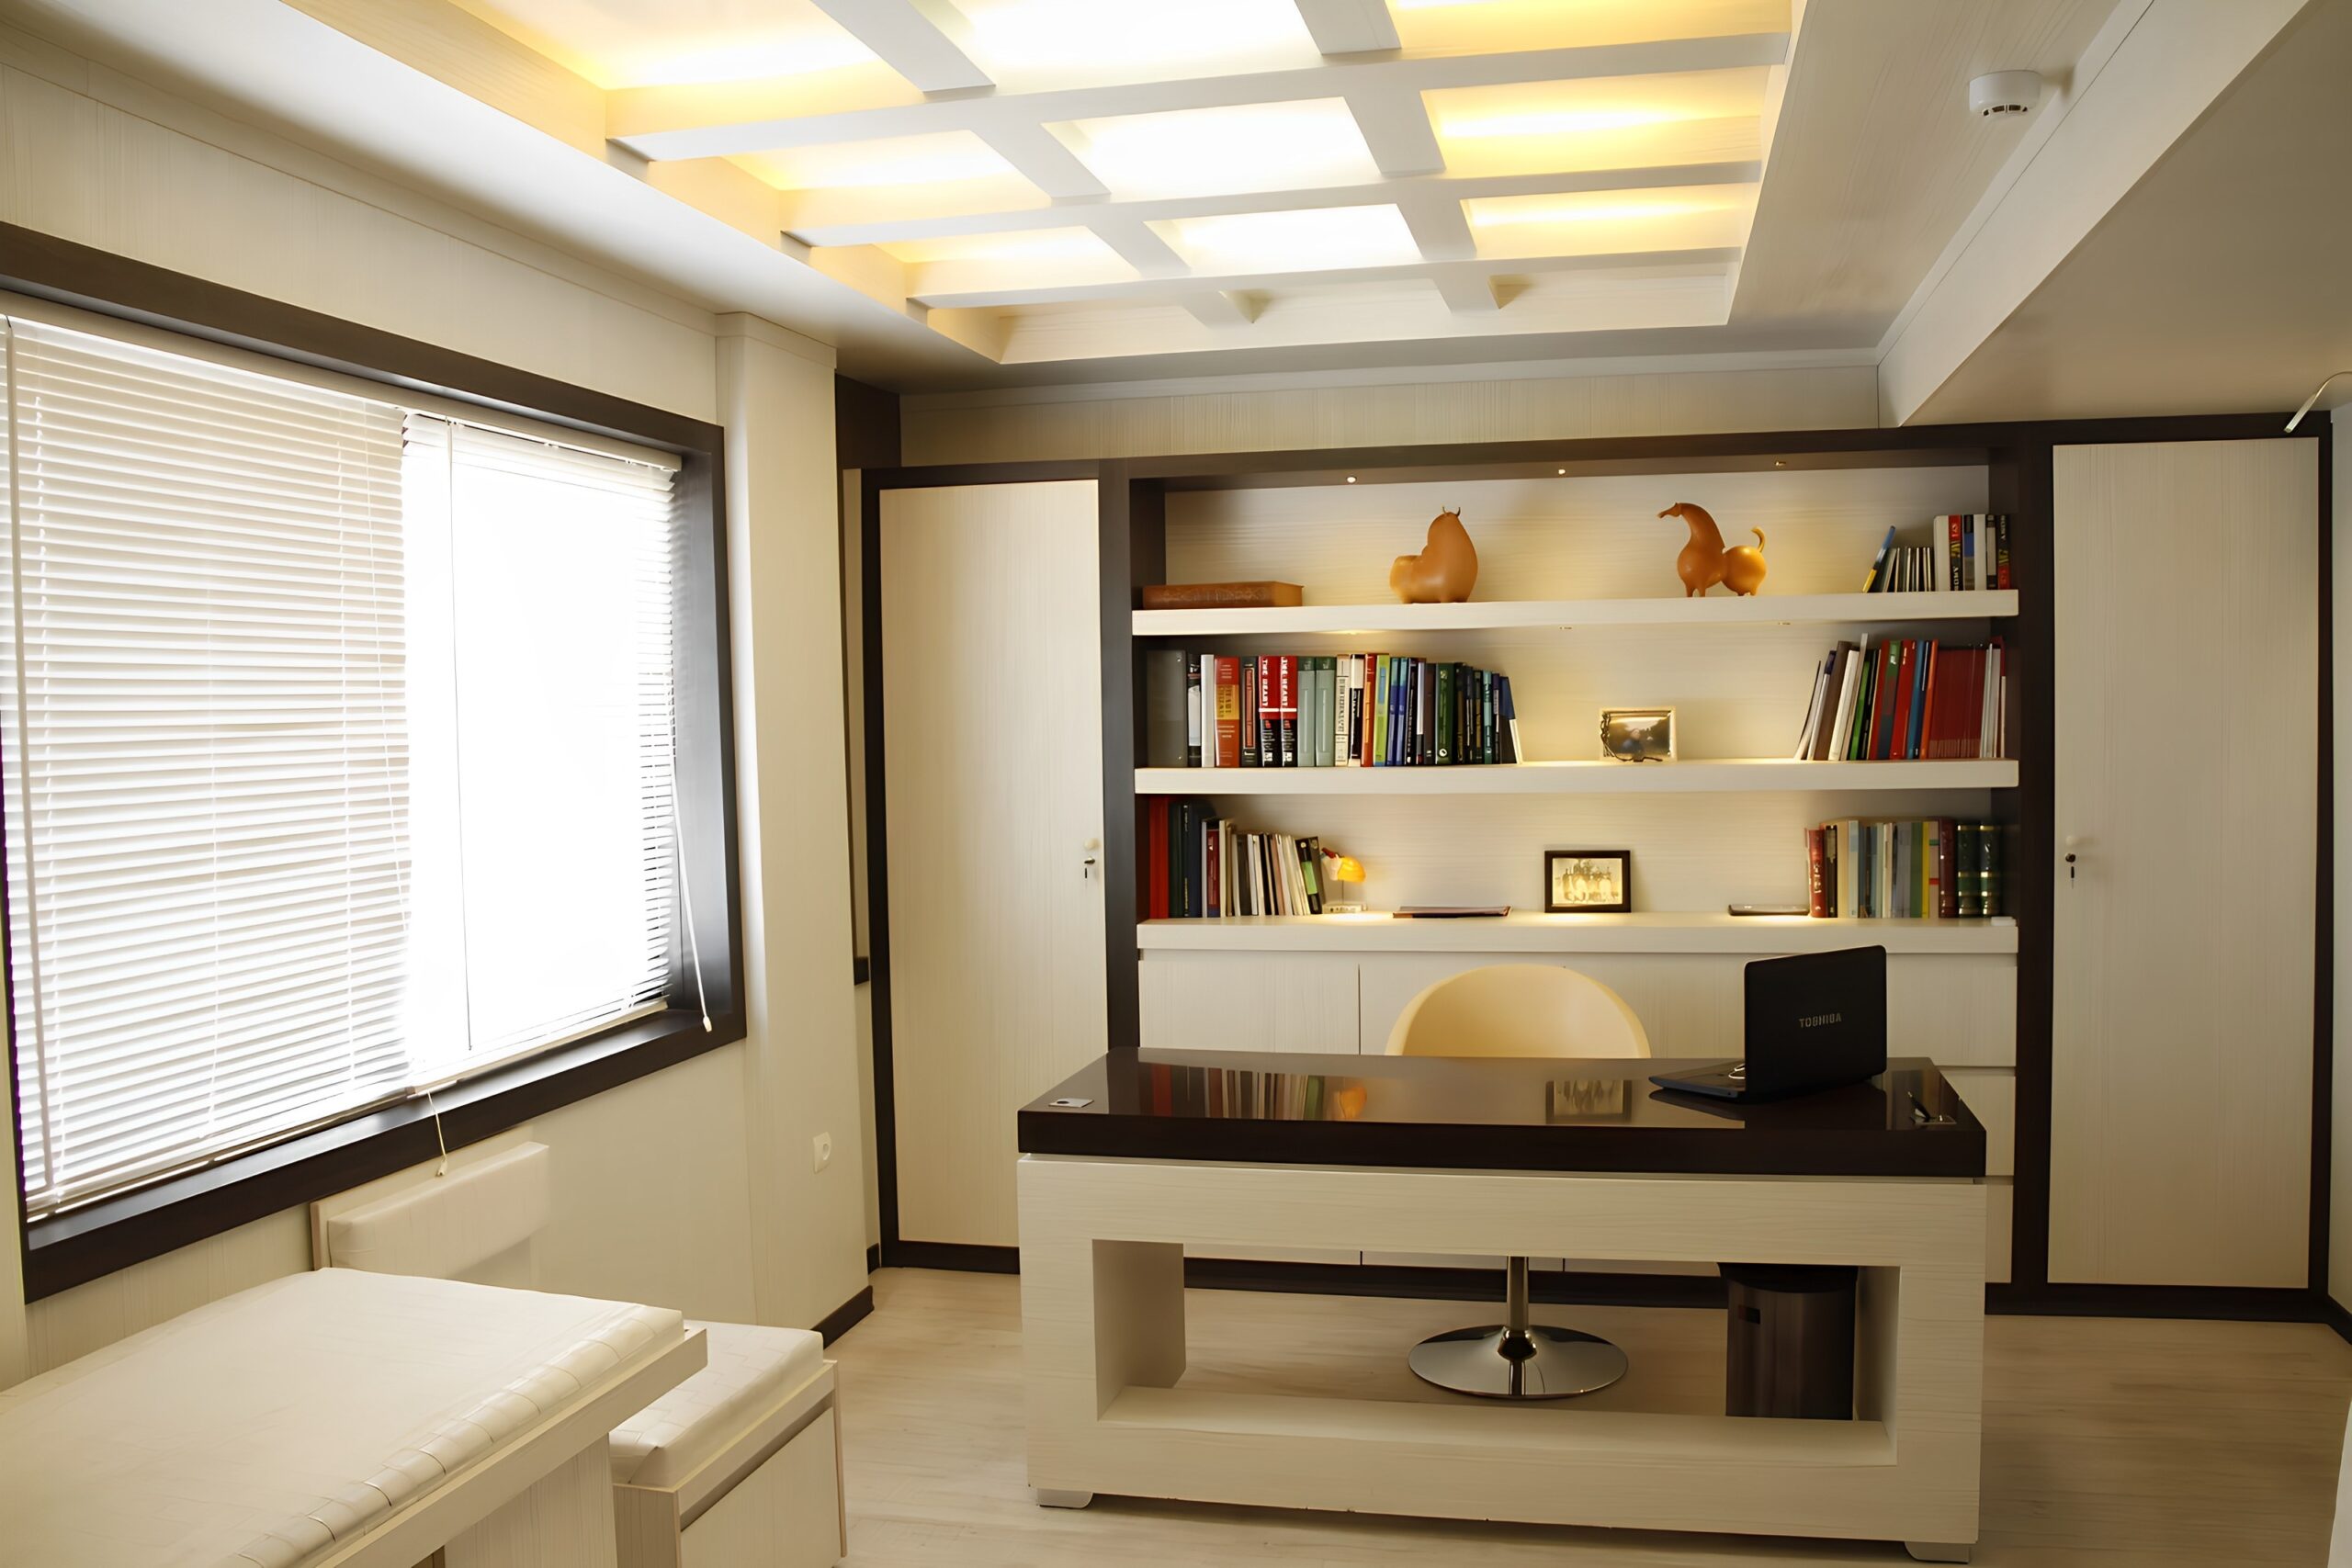 11 new1 scaled - Interior design of Dr. Ahmadieh  project